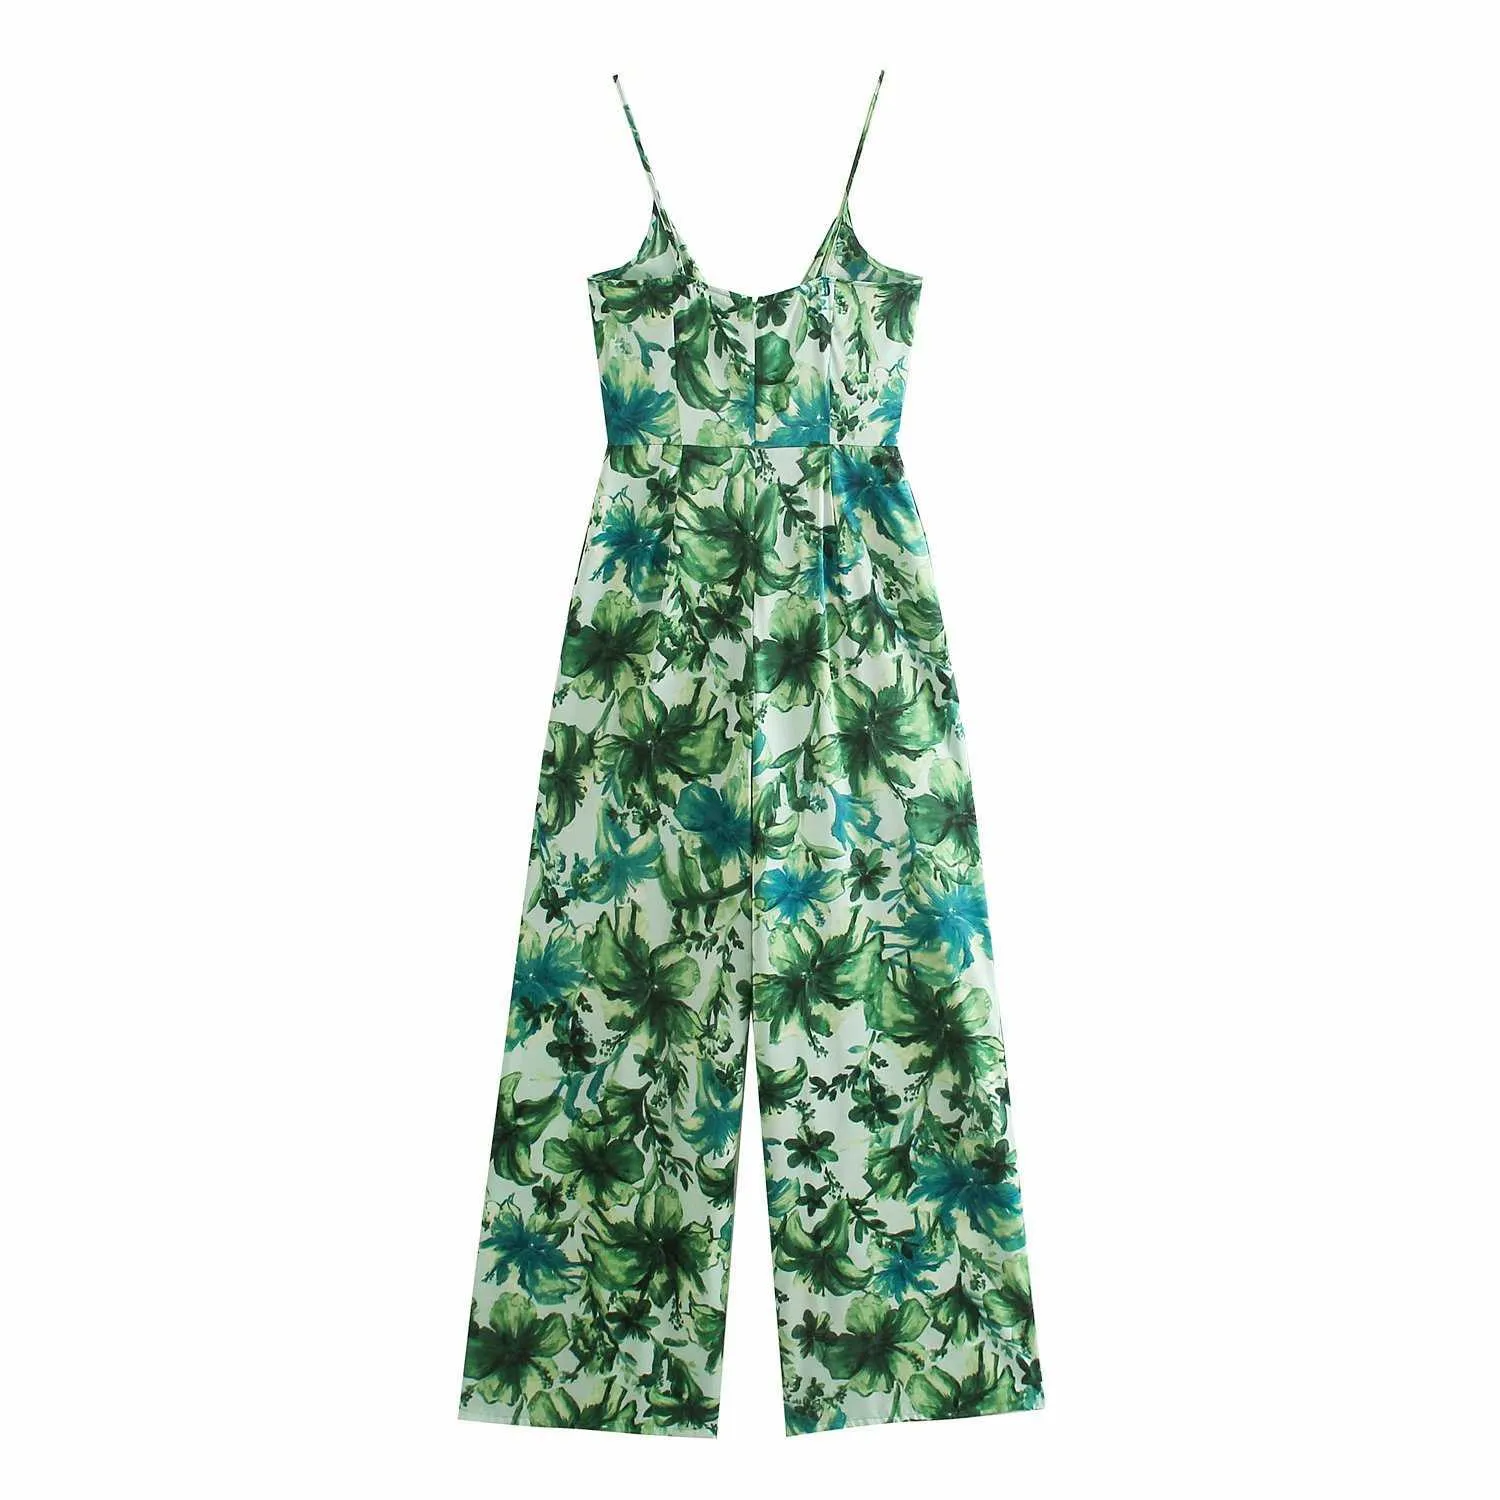 jumpsuit women Summer Casual Fashion Chic Elegant Lady Romper outfit playsuit Women Hawaiian tropical style 210709